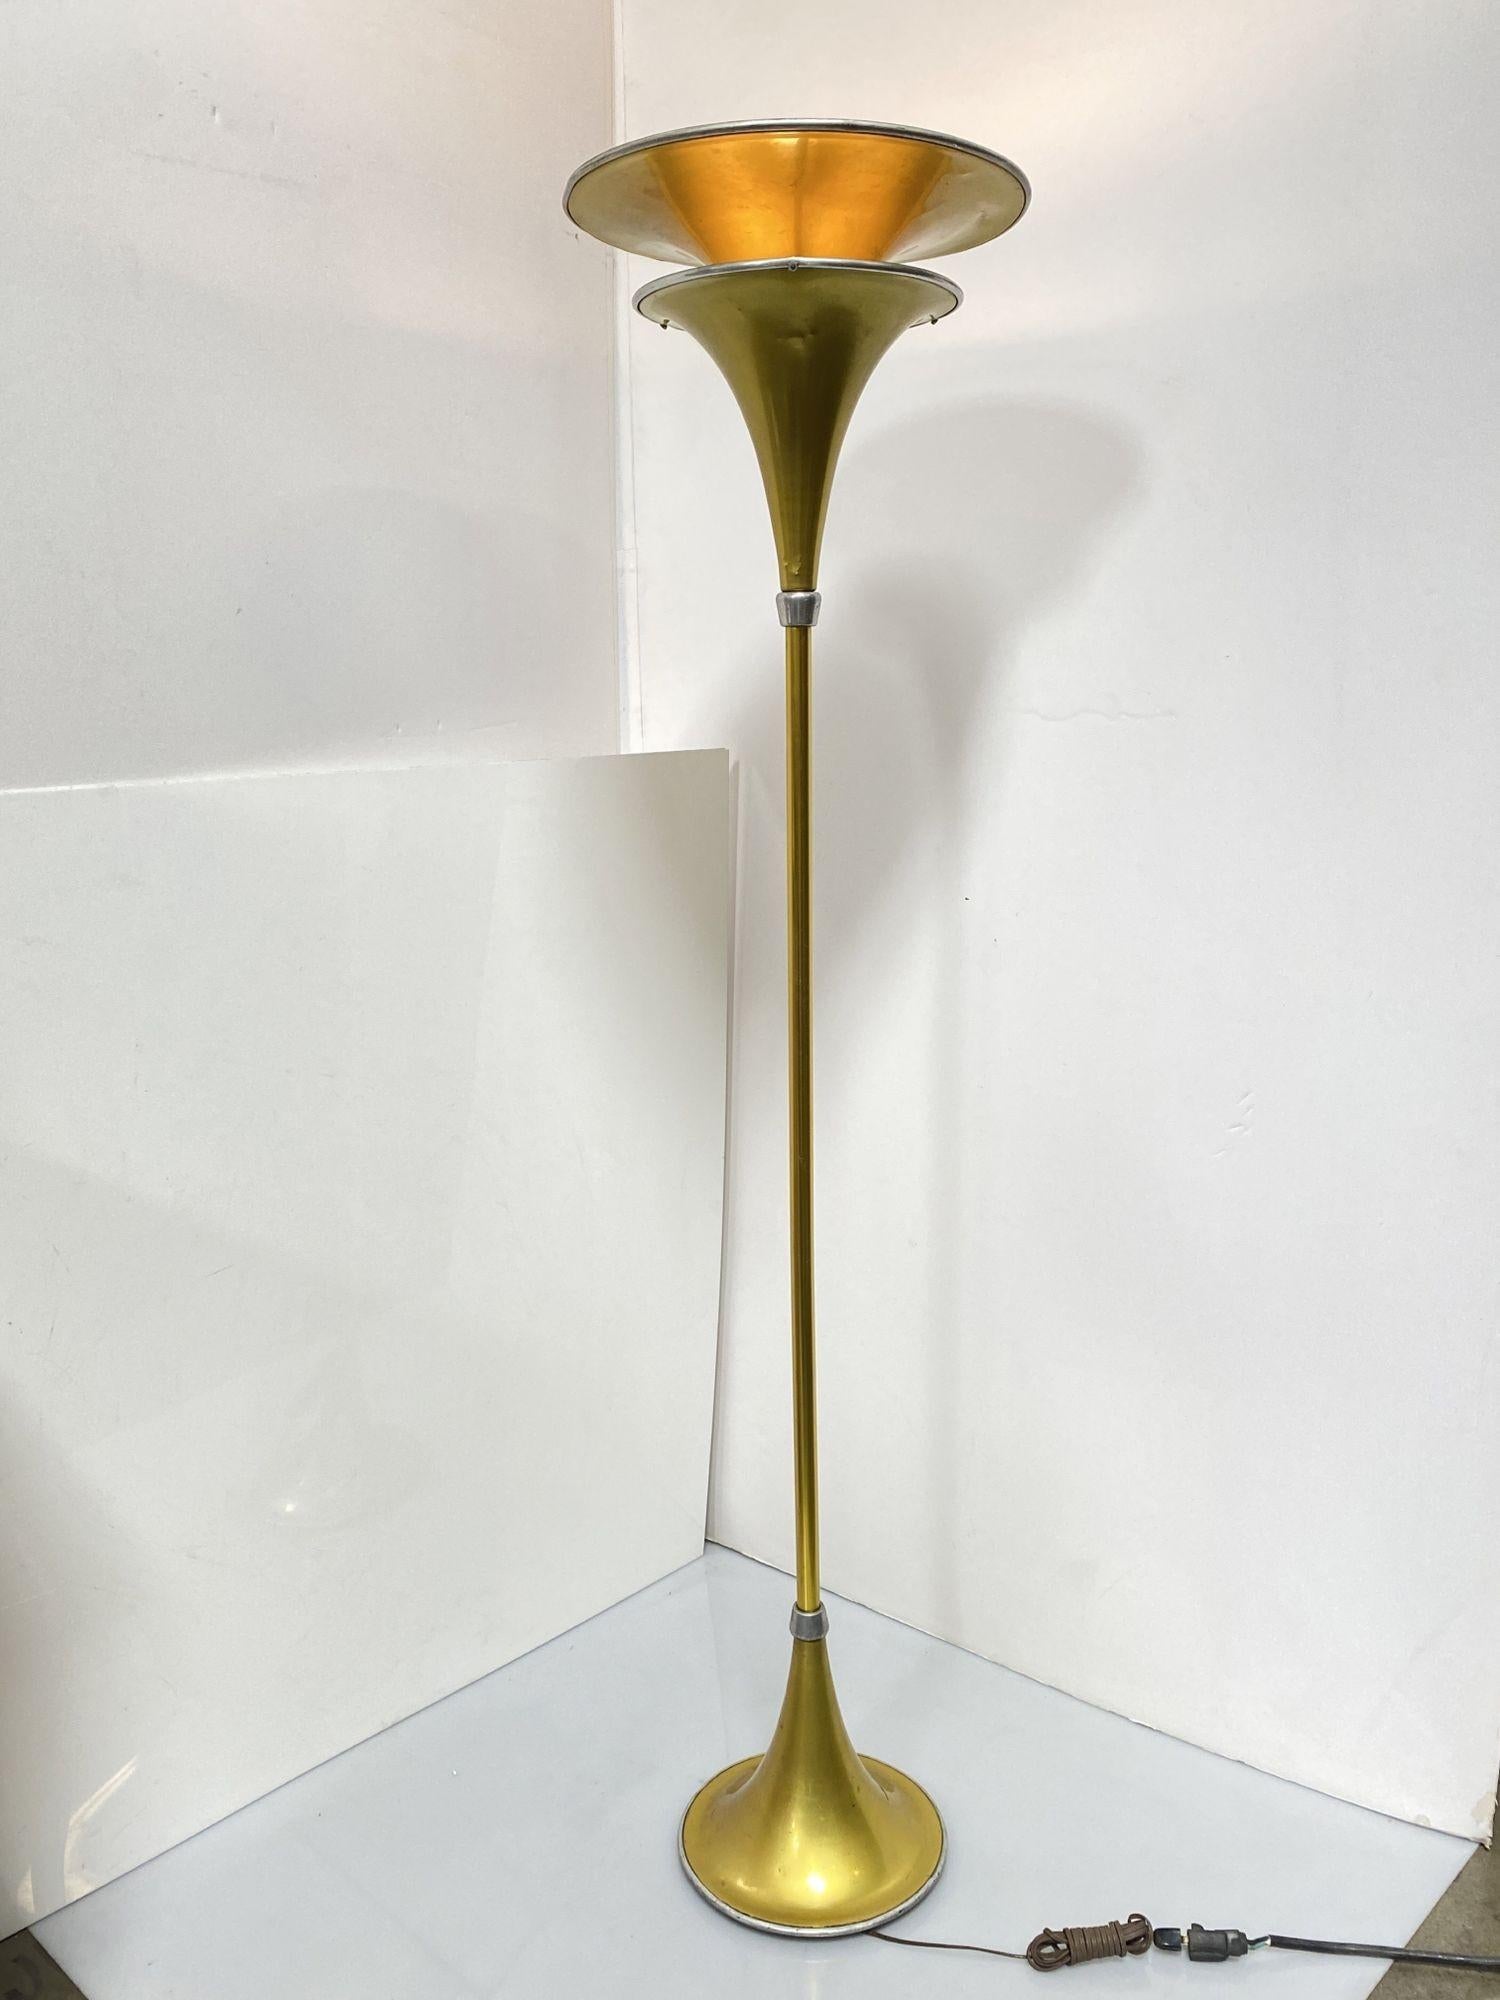 Rare Art Deco, machine-age anodized aluminum torchiere floor lamp. Classic two-tier top, as well as unusual trumpet base, gold color, 16